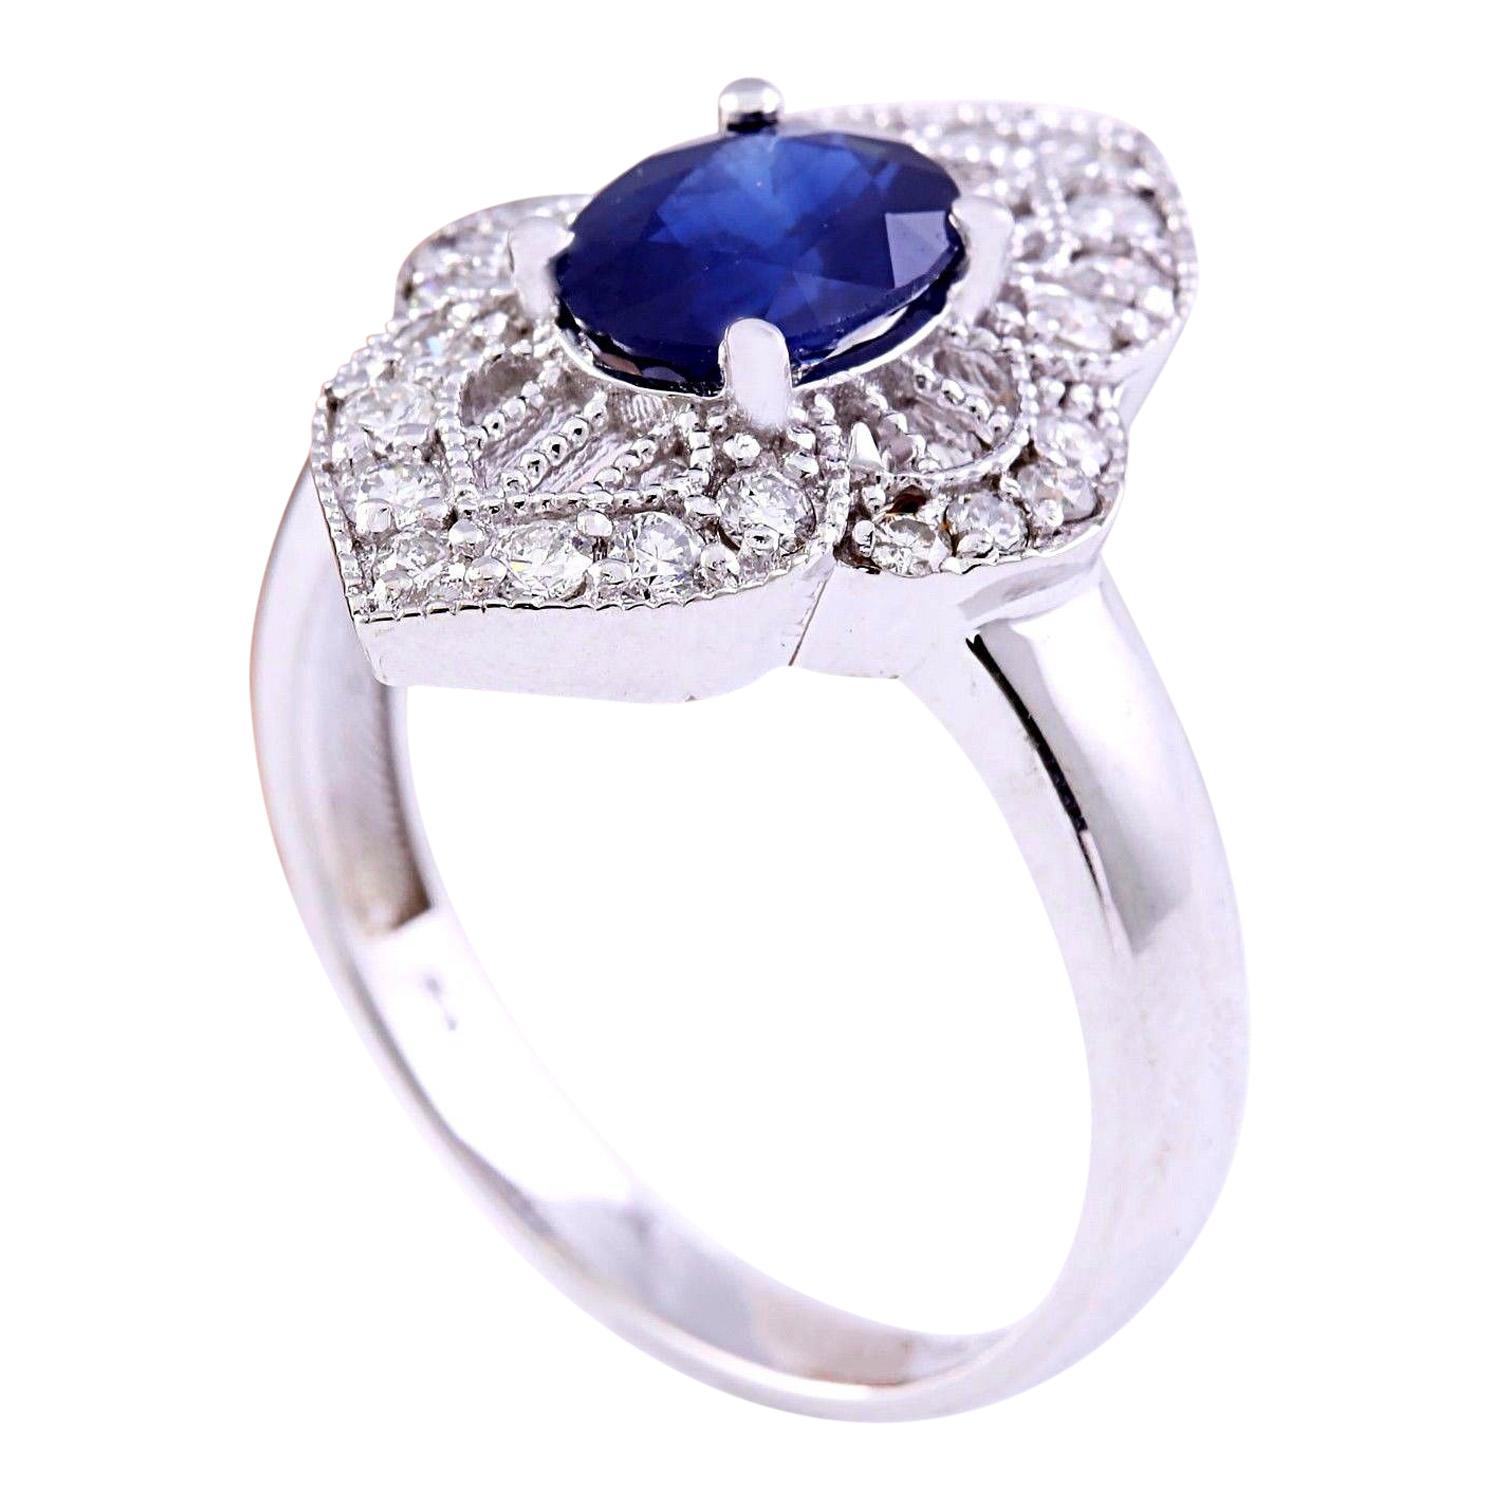 1.85 Carat Natural Sapphire 14 Karat Solid White Gold Diamond Ring In New Condition For Sale In Los Angeles, CA